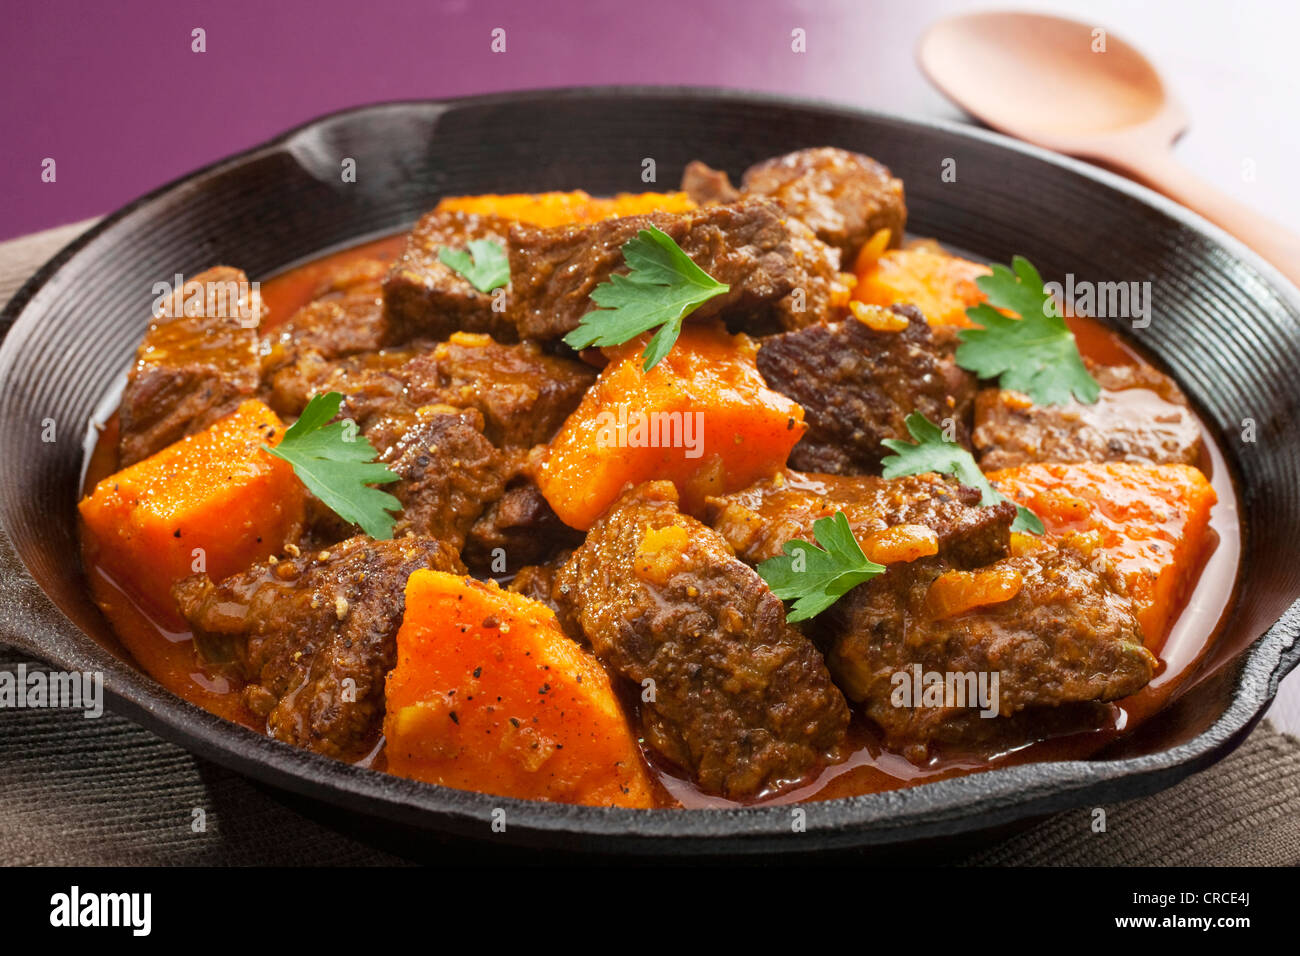 Moroccan tagine or stew of beef with sweet potato, in a cast iron pan. Stock Photo